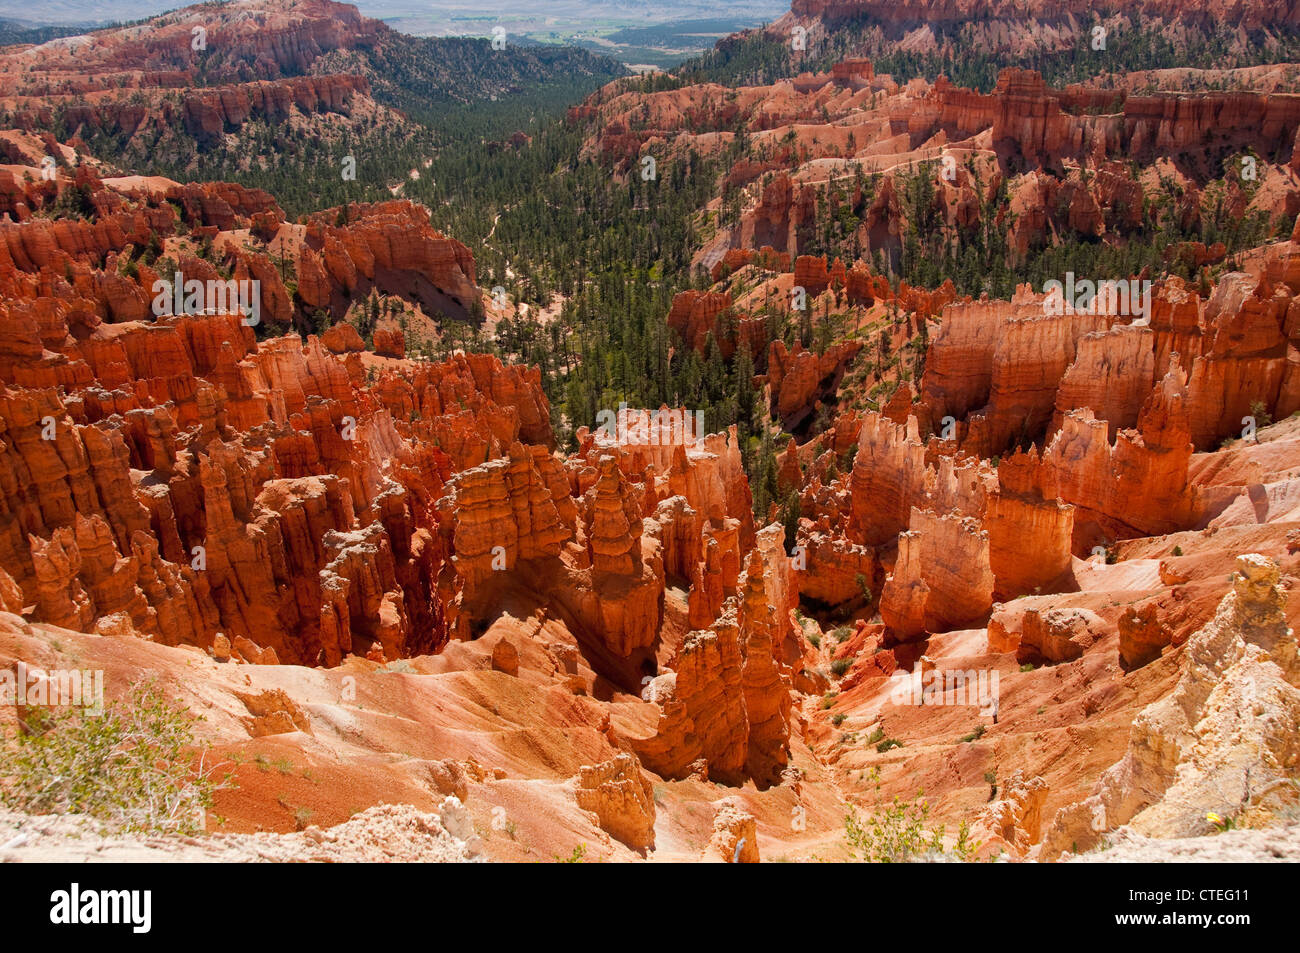 USA, Utah, morning light on landscape at Sunrise Point in Bryce Canyon National Park. Stock Photo